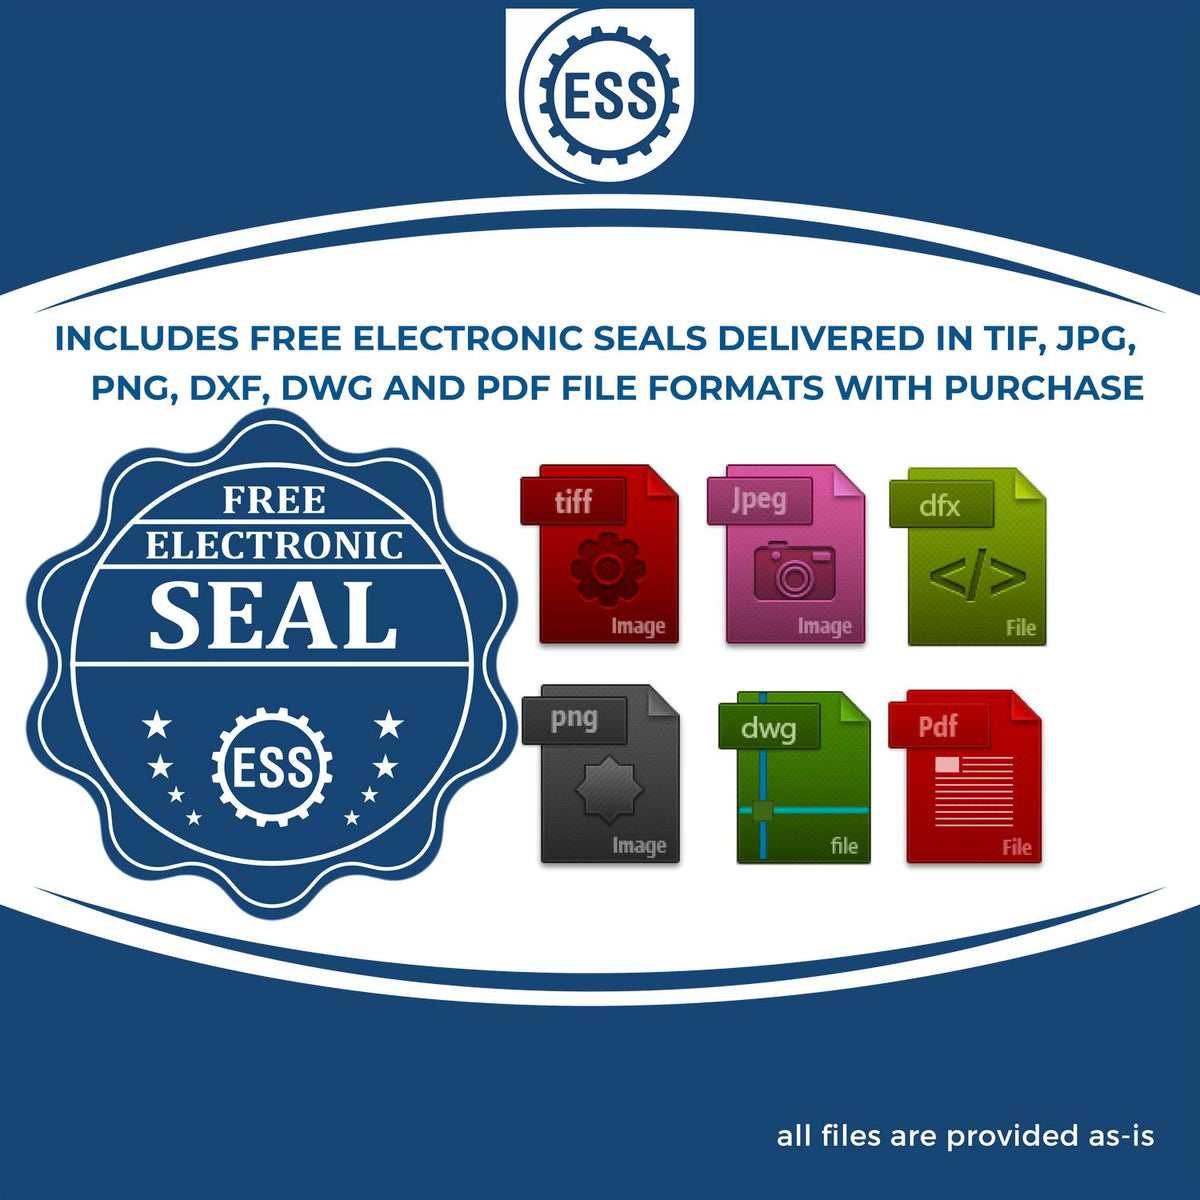 An infographic for the free electronic seal for the Hybrid Georgia Architect Seal illustrating the different file type icons such as DXF, DWG, TIF, JPG and PNG.